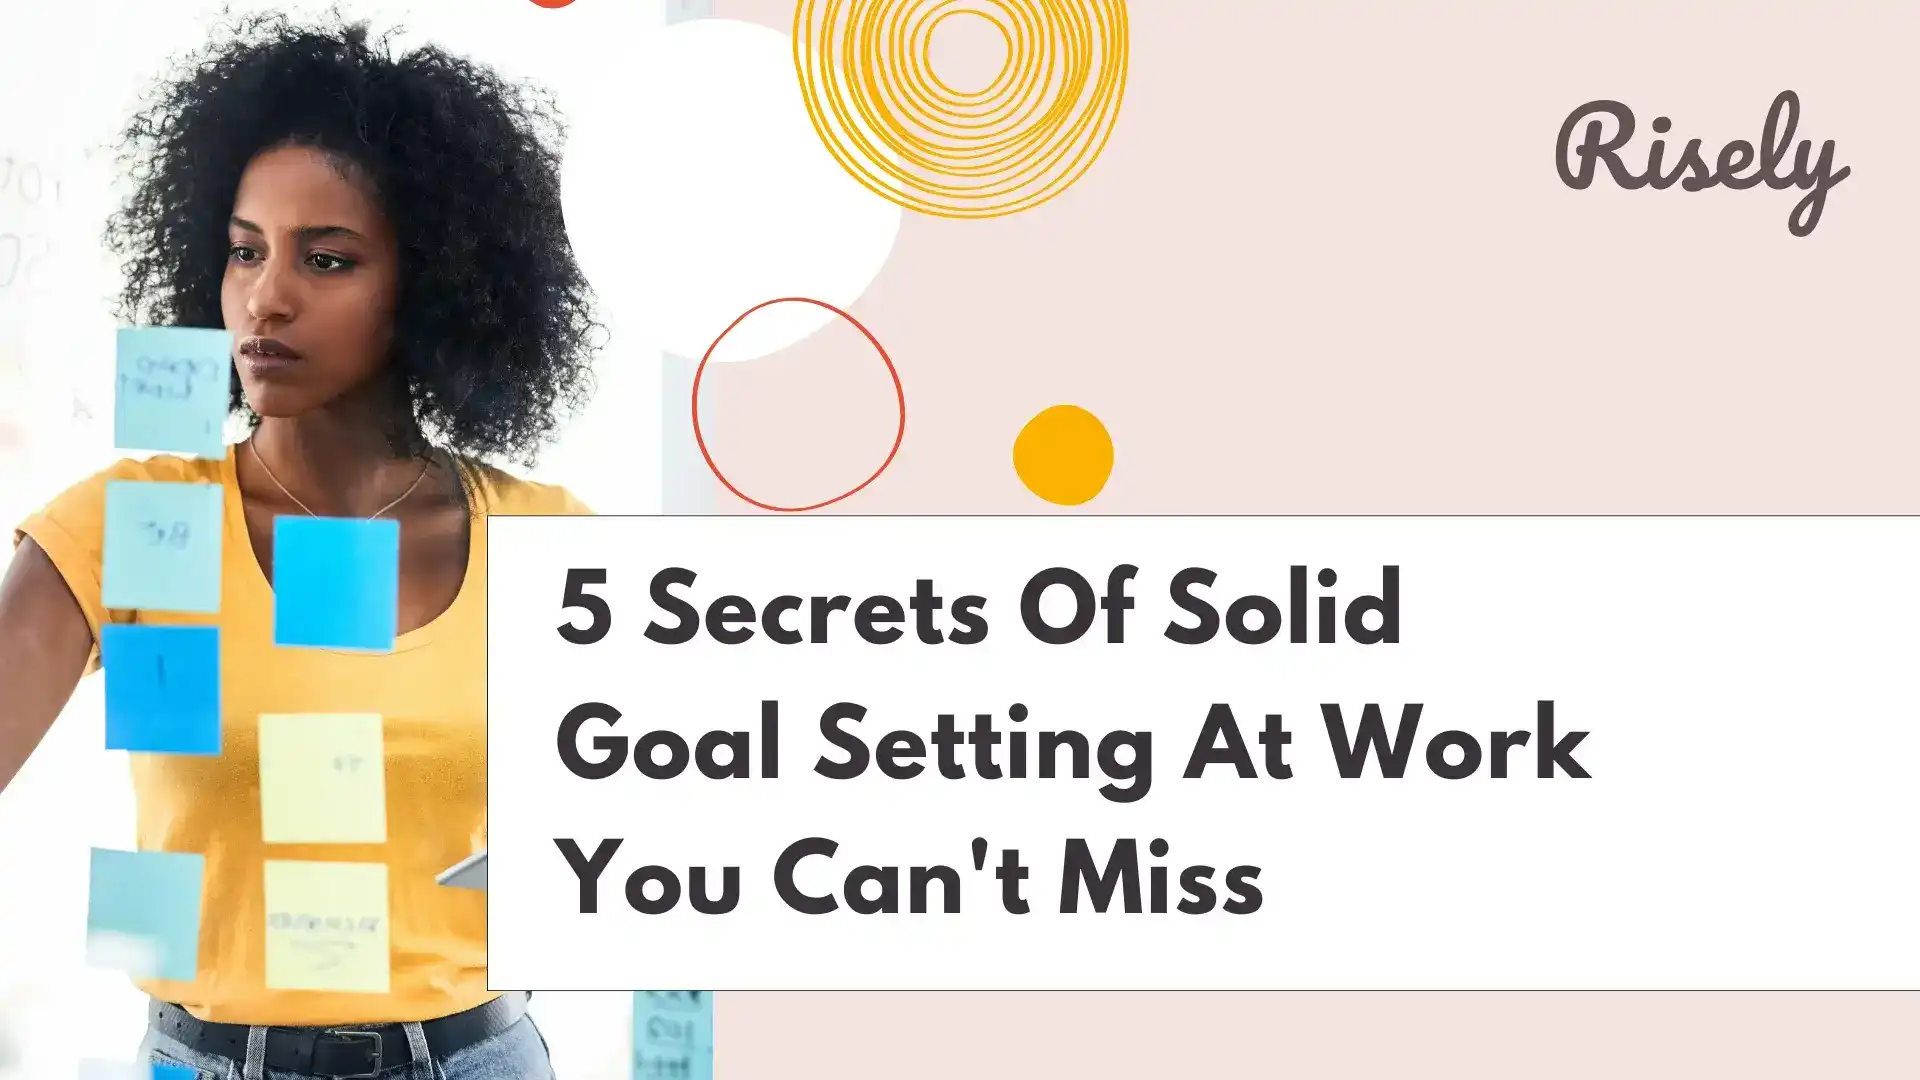 5 Secrets Of Solid Goal Setting At Work You Can’t Miss